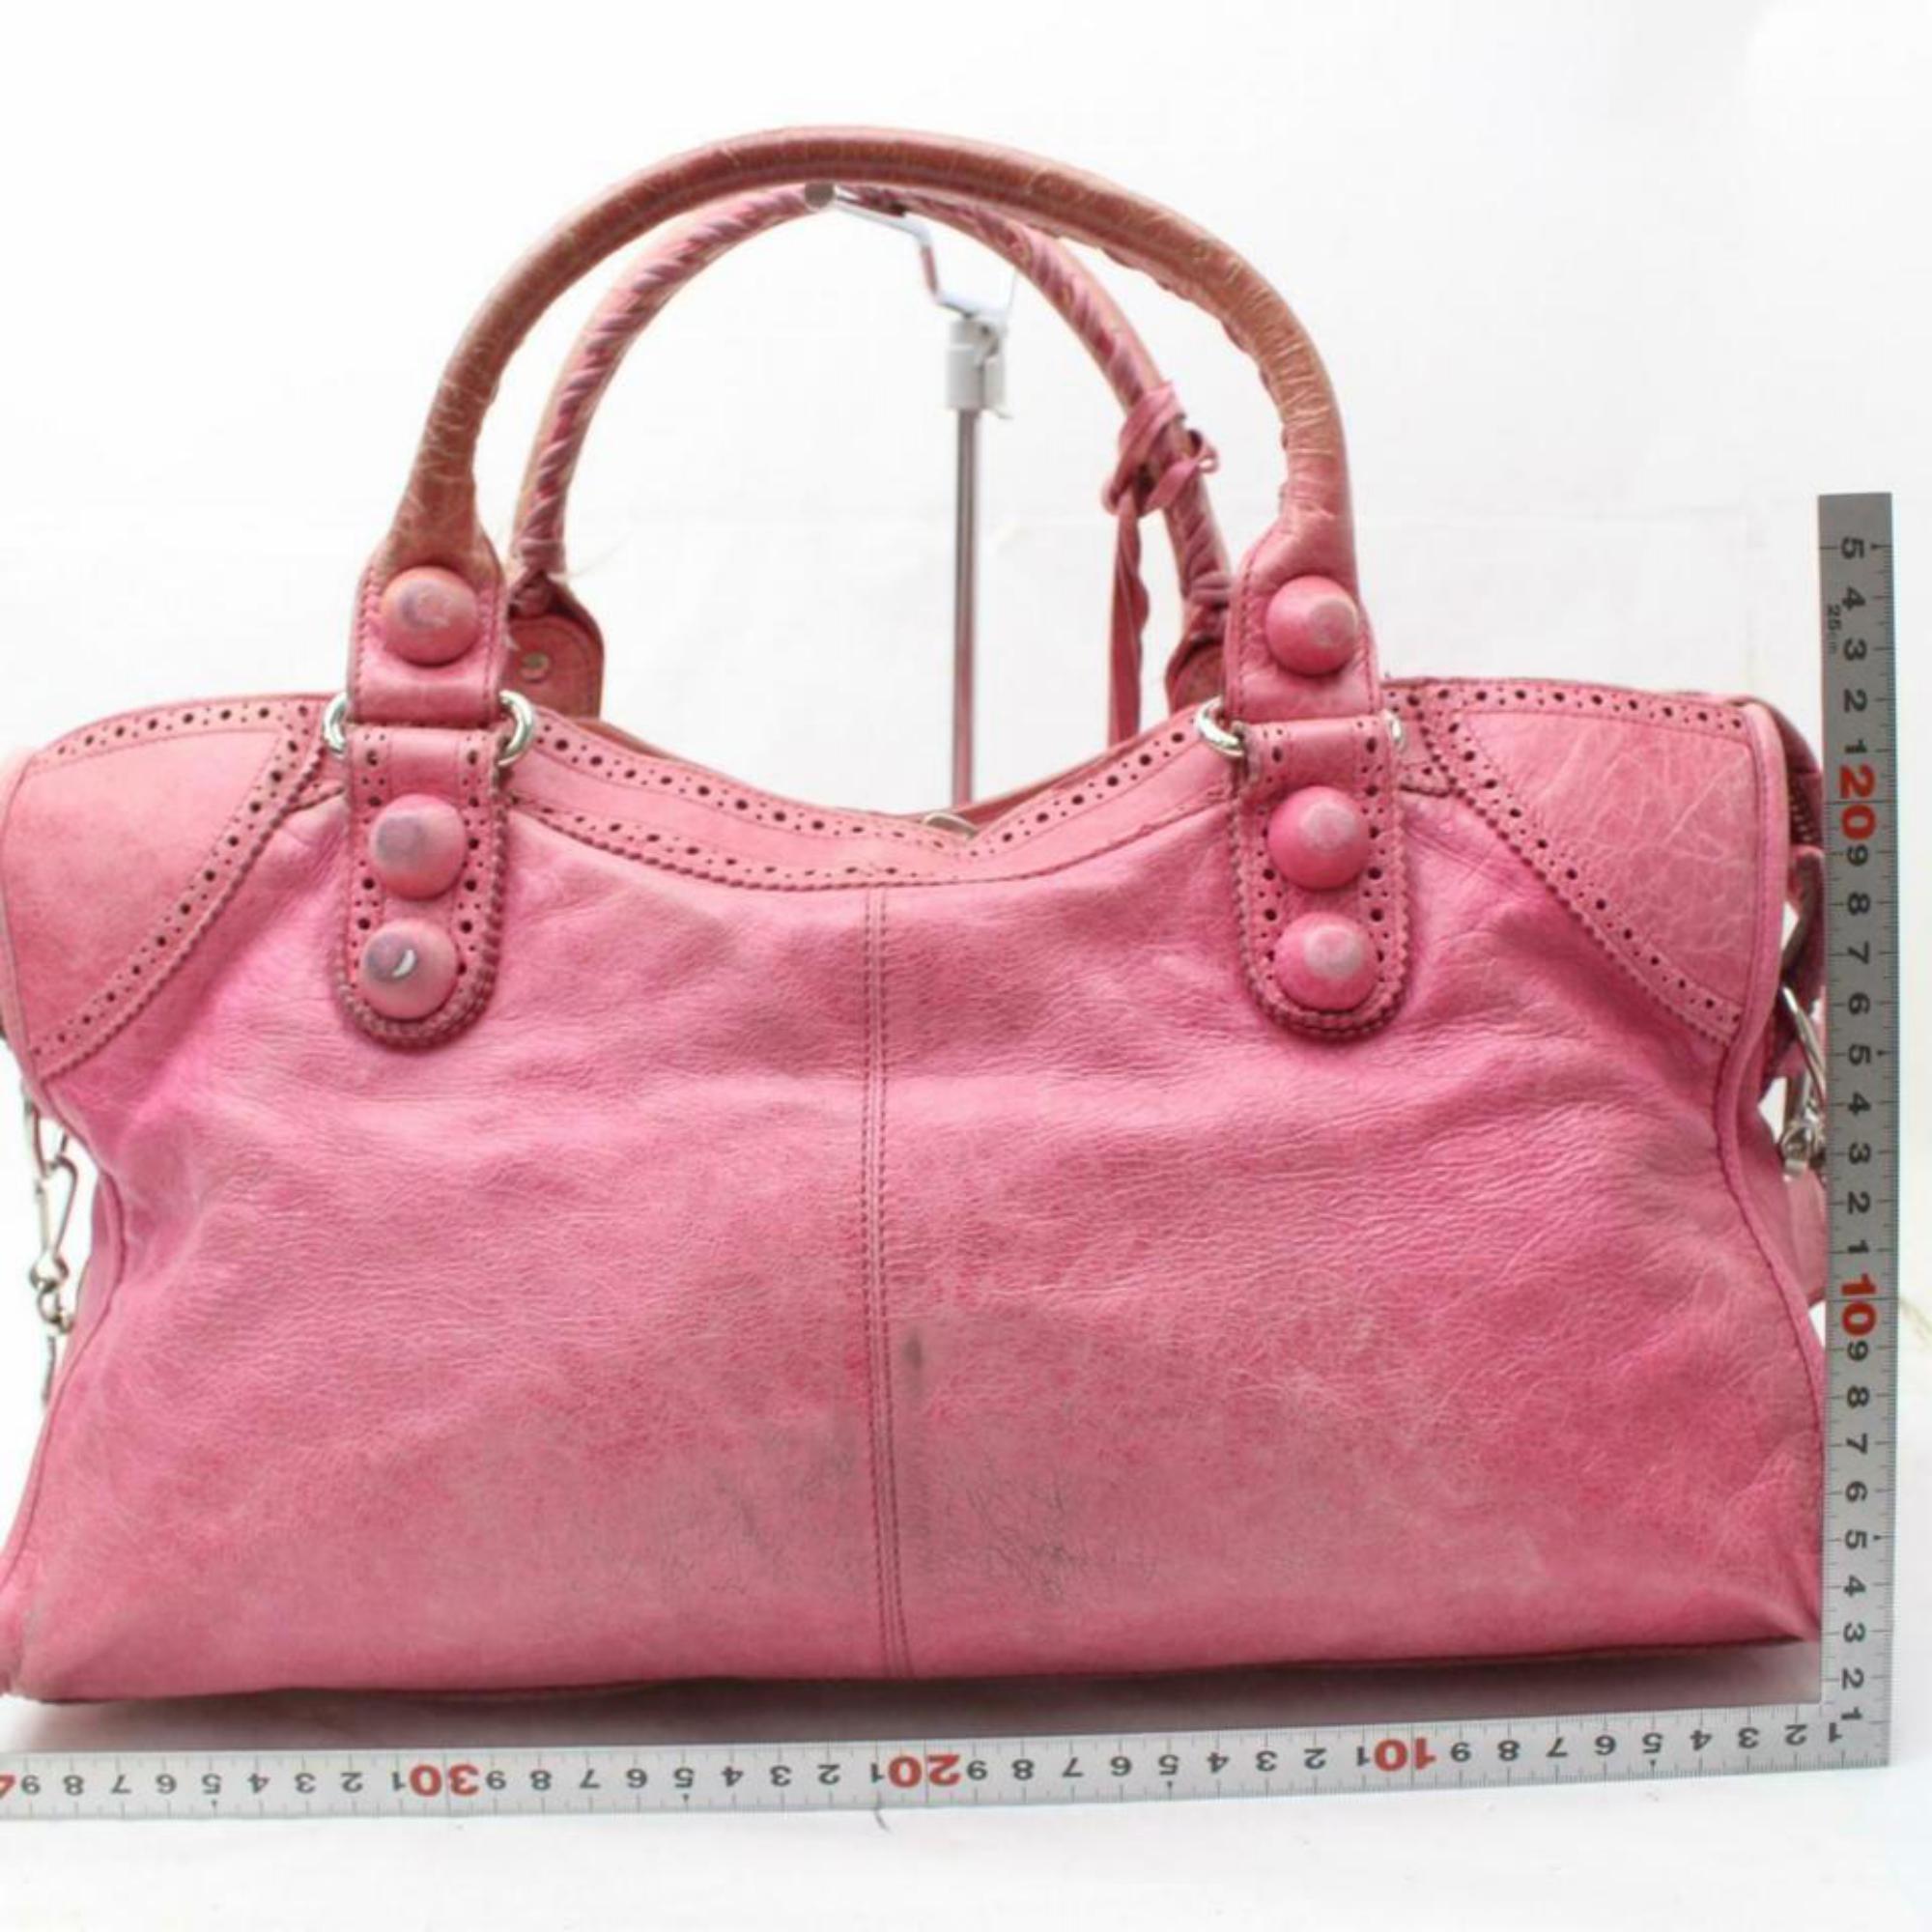 Balenciaga Oxford The City 2way 870151 Pink Leather Shoulder Bag For Sale 1